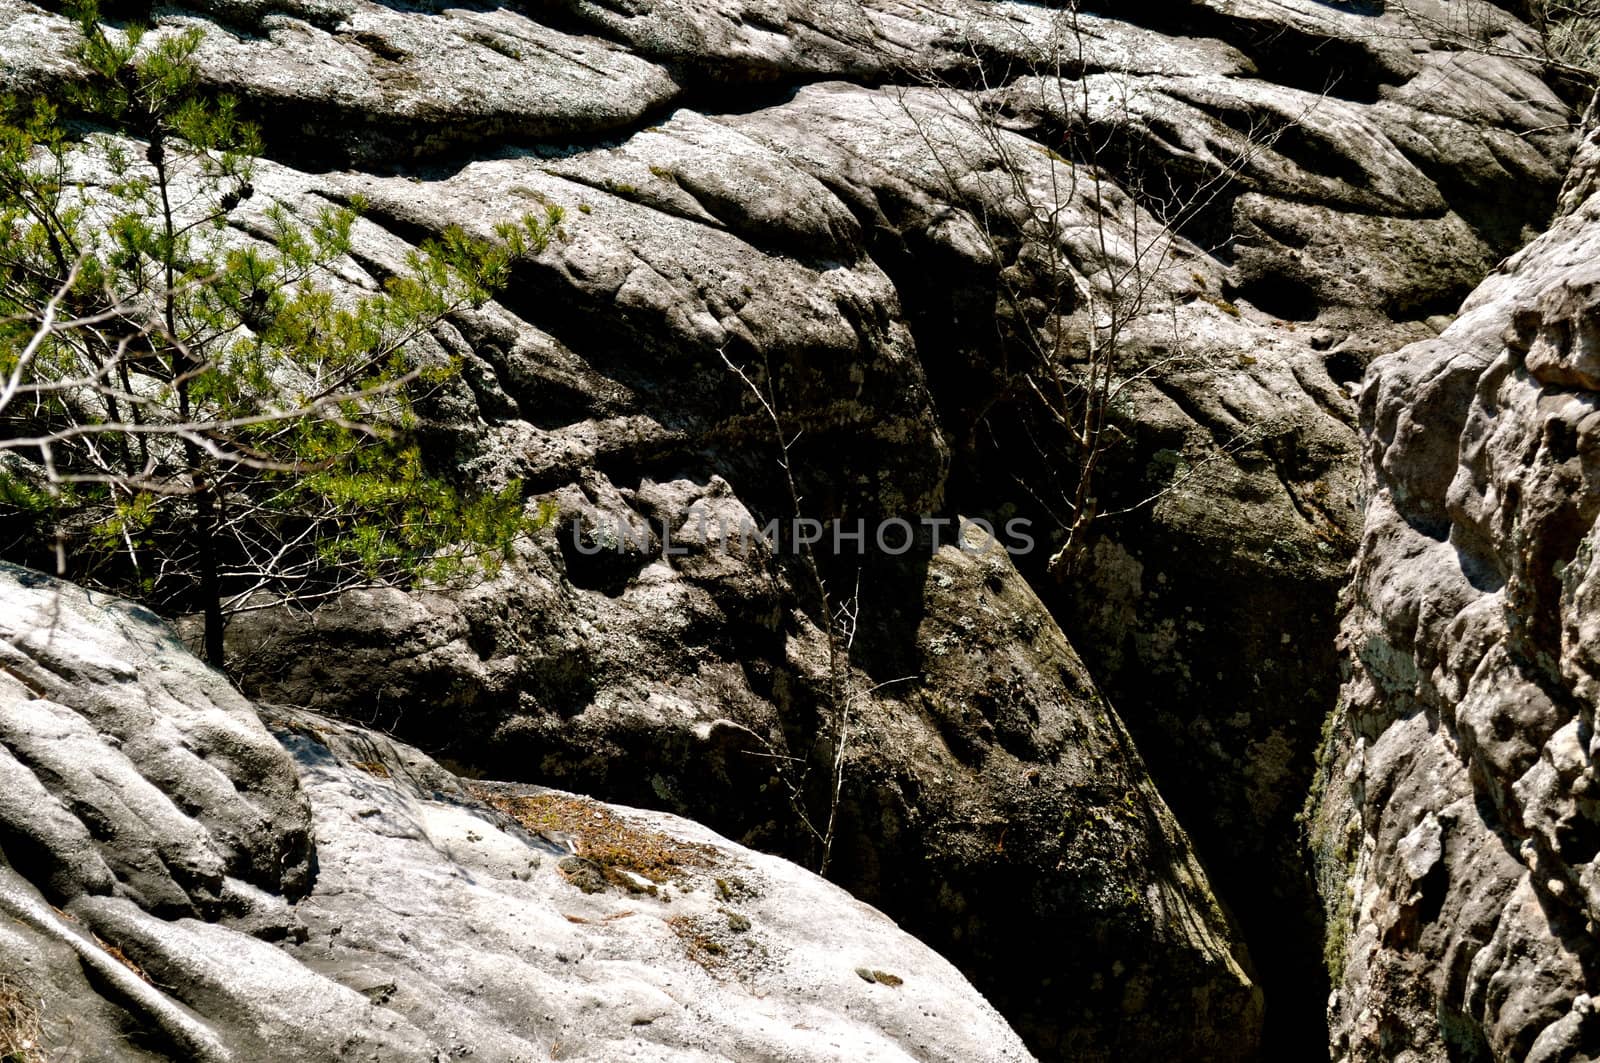 See Rock City 32 by RefocusPhoto